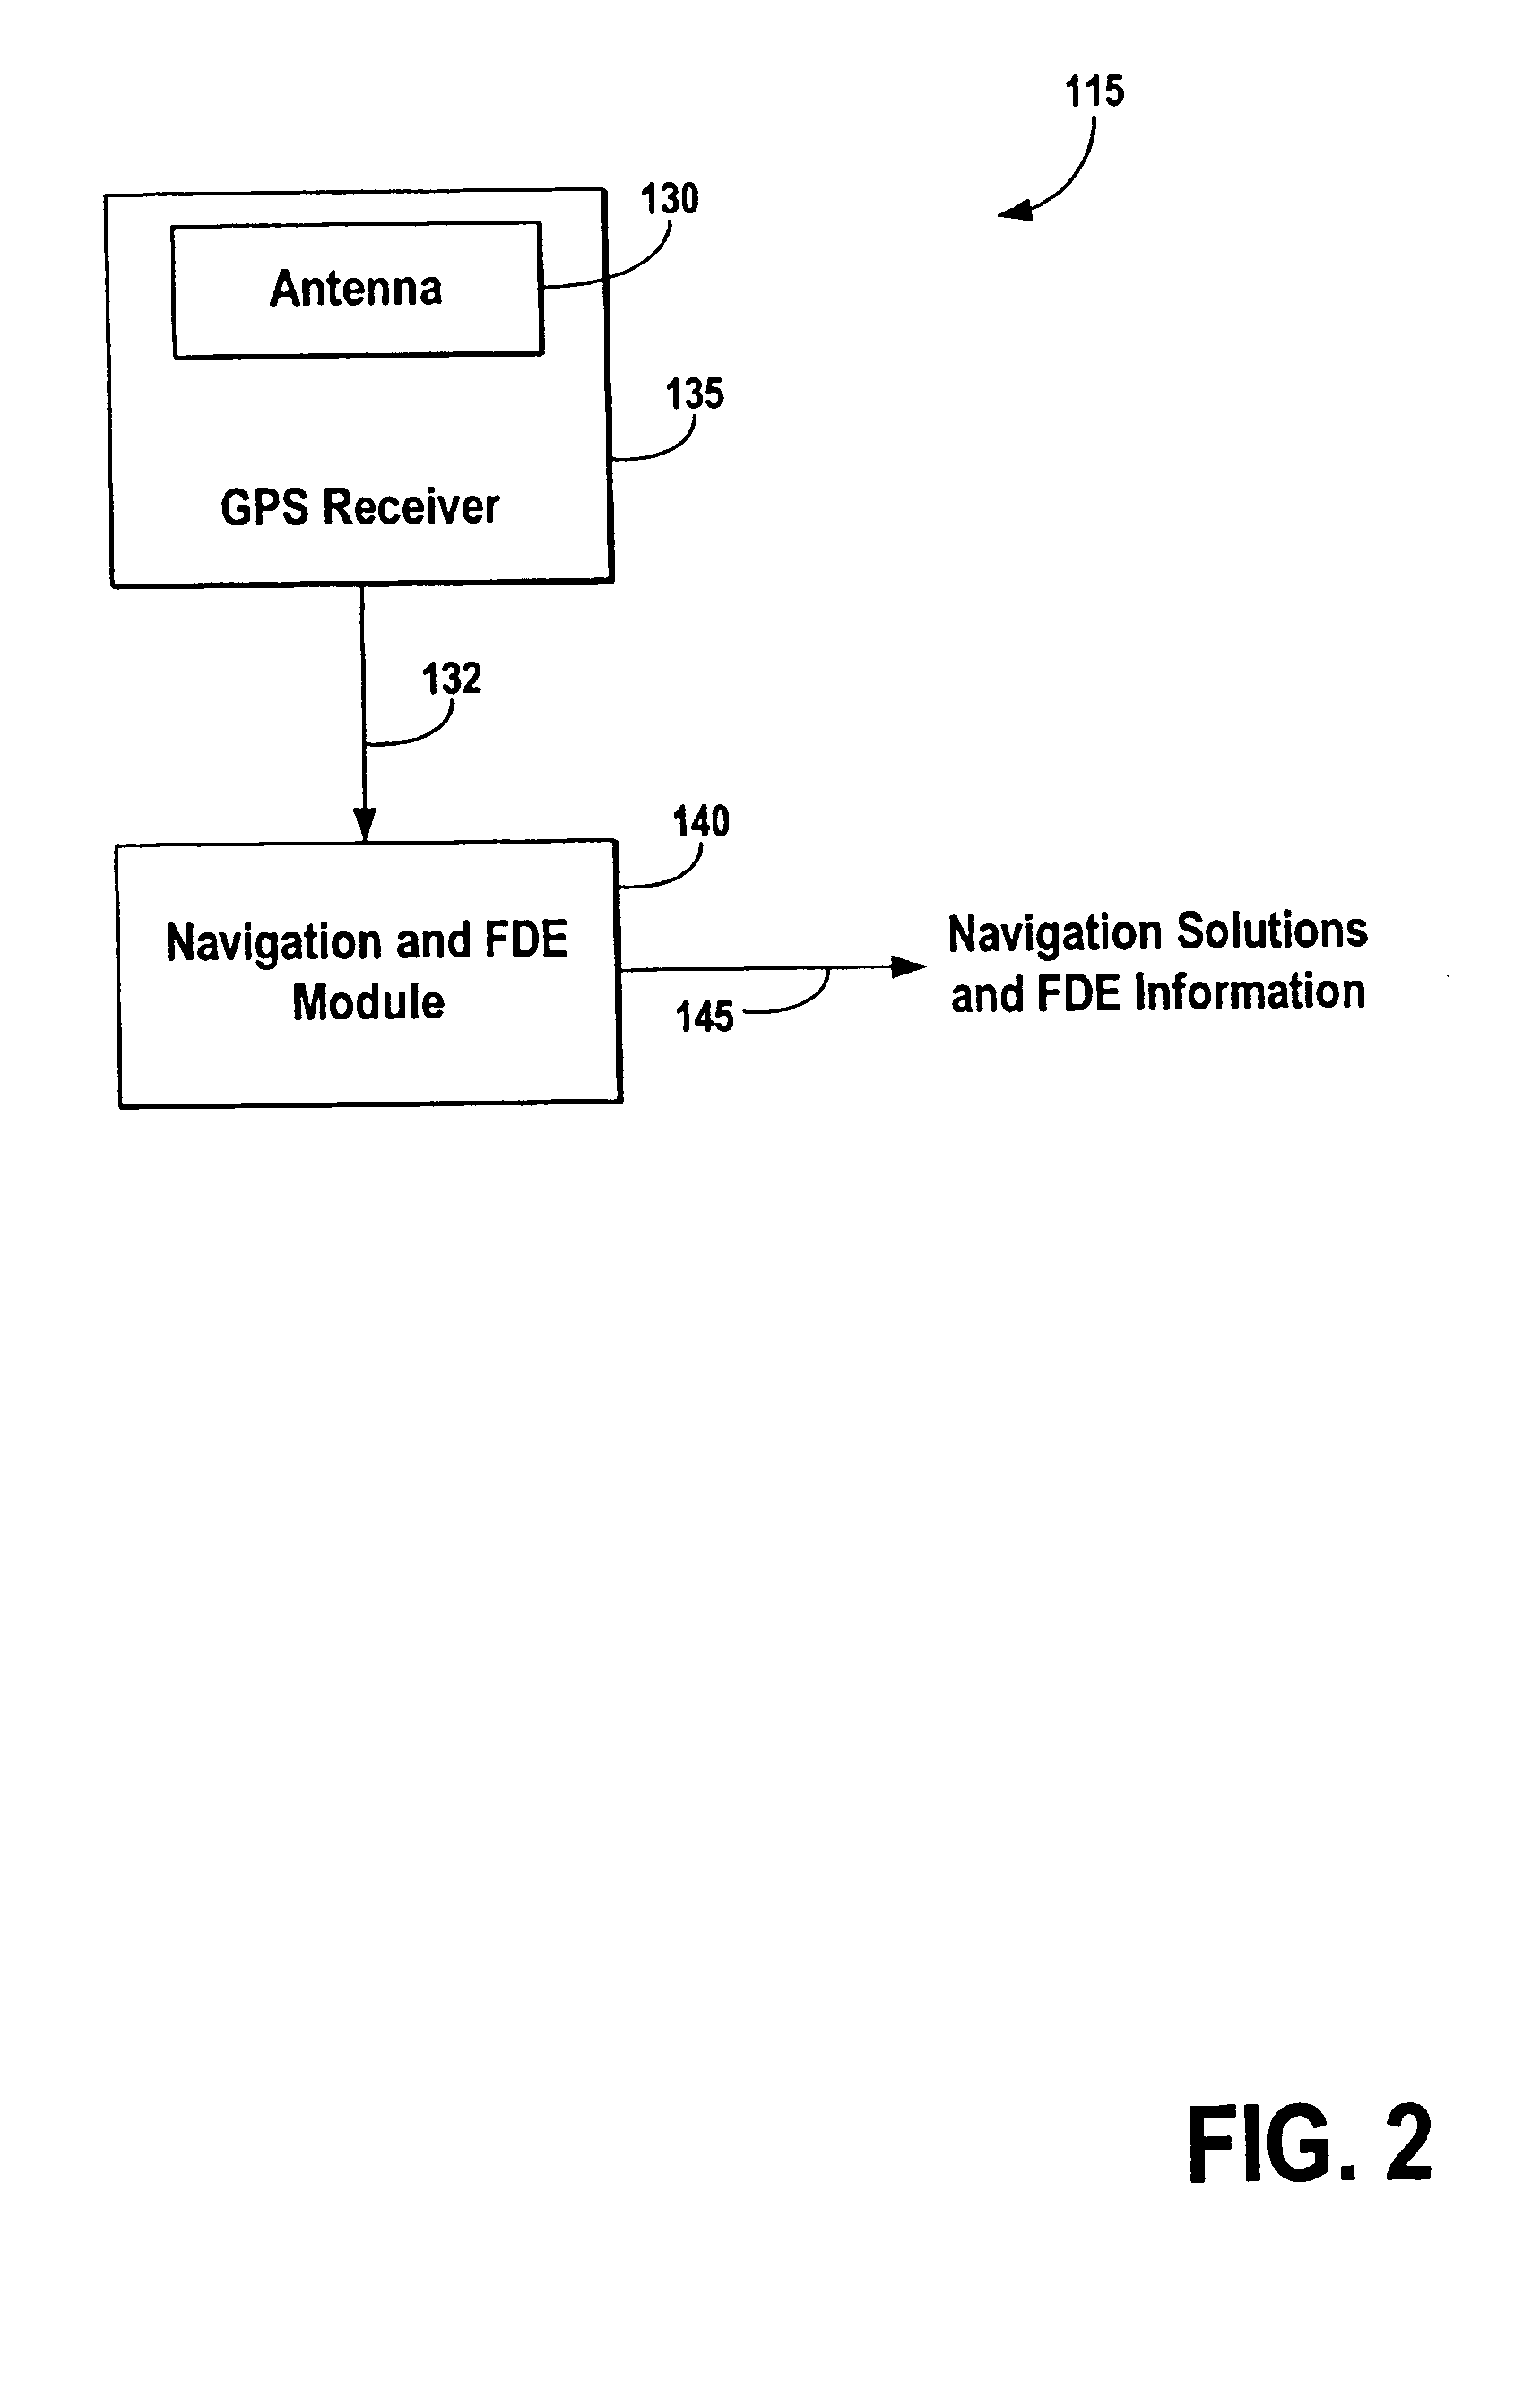 Systems and methods for fault detection and exclusion in navigational systems